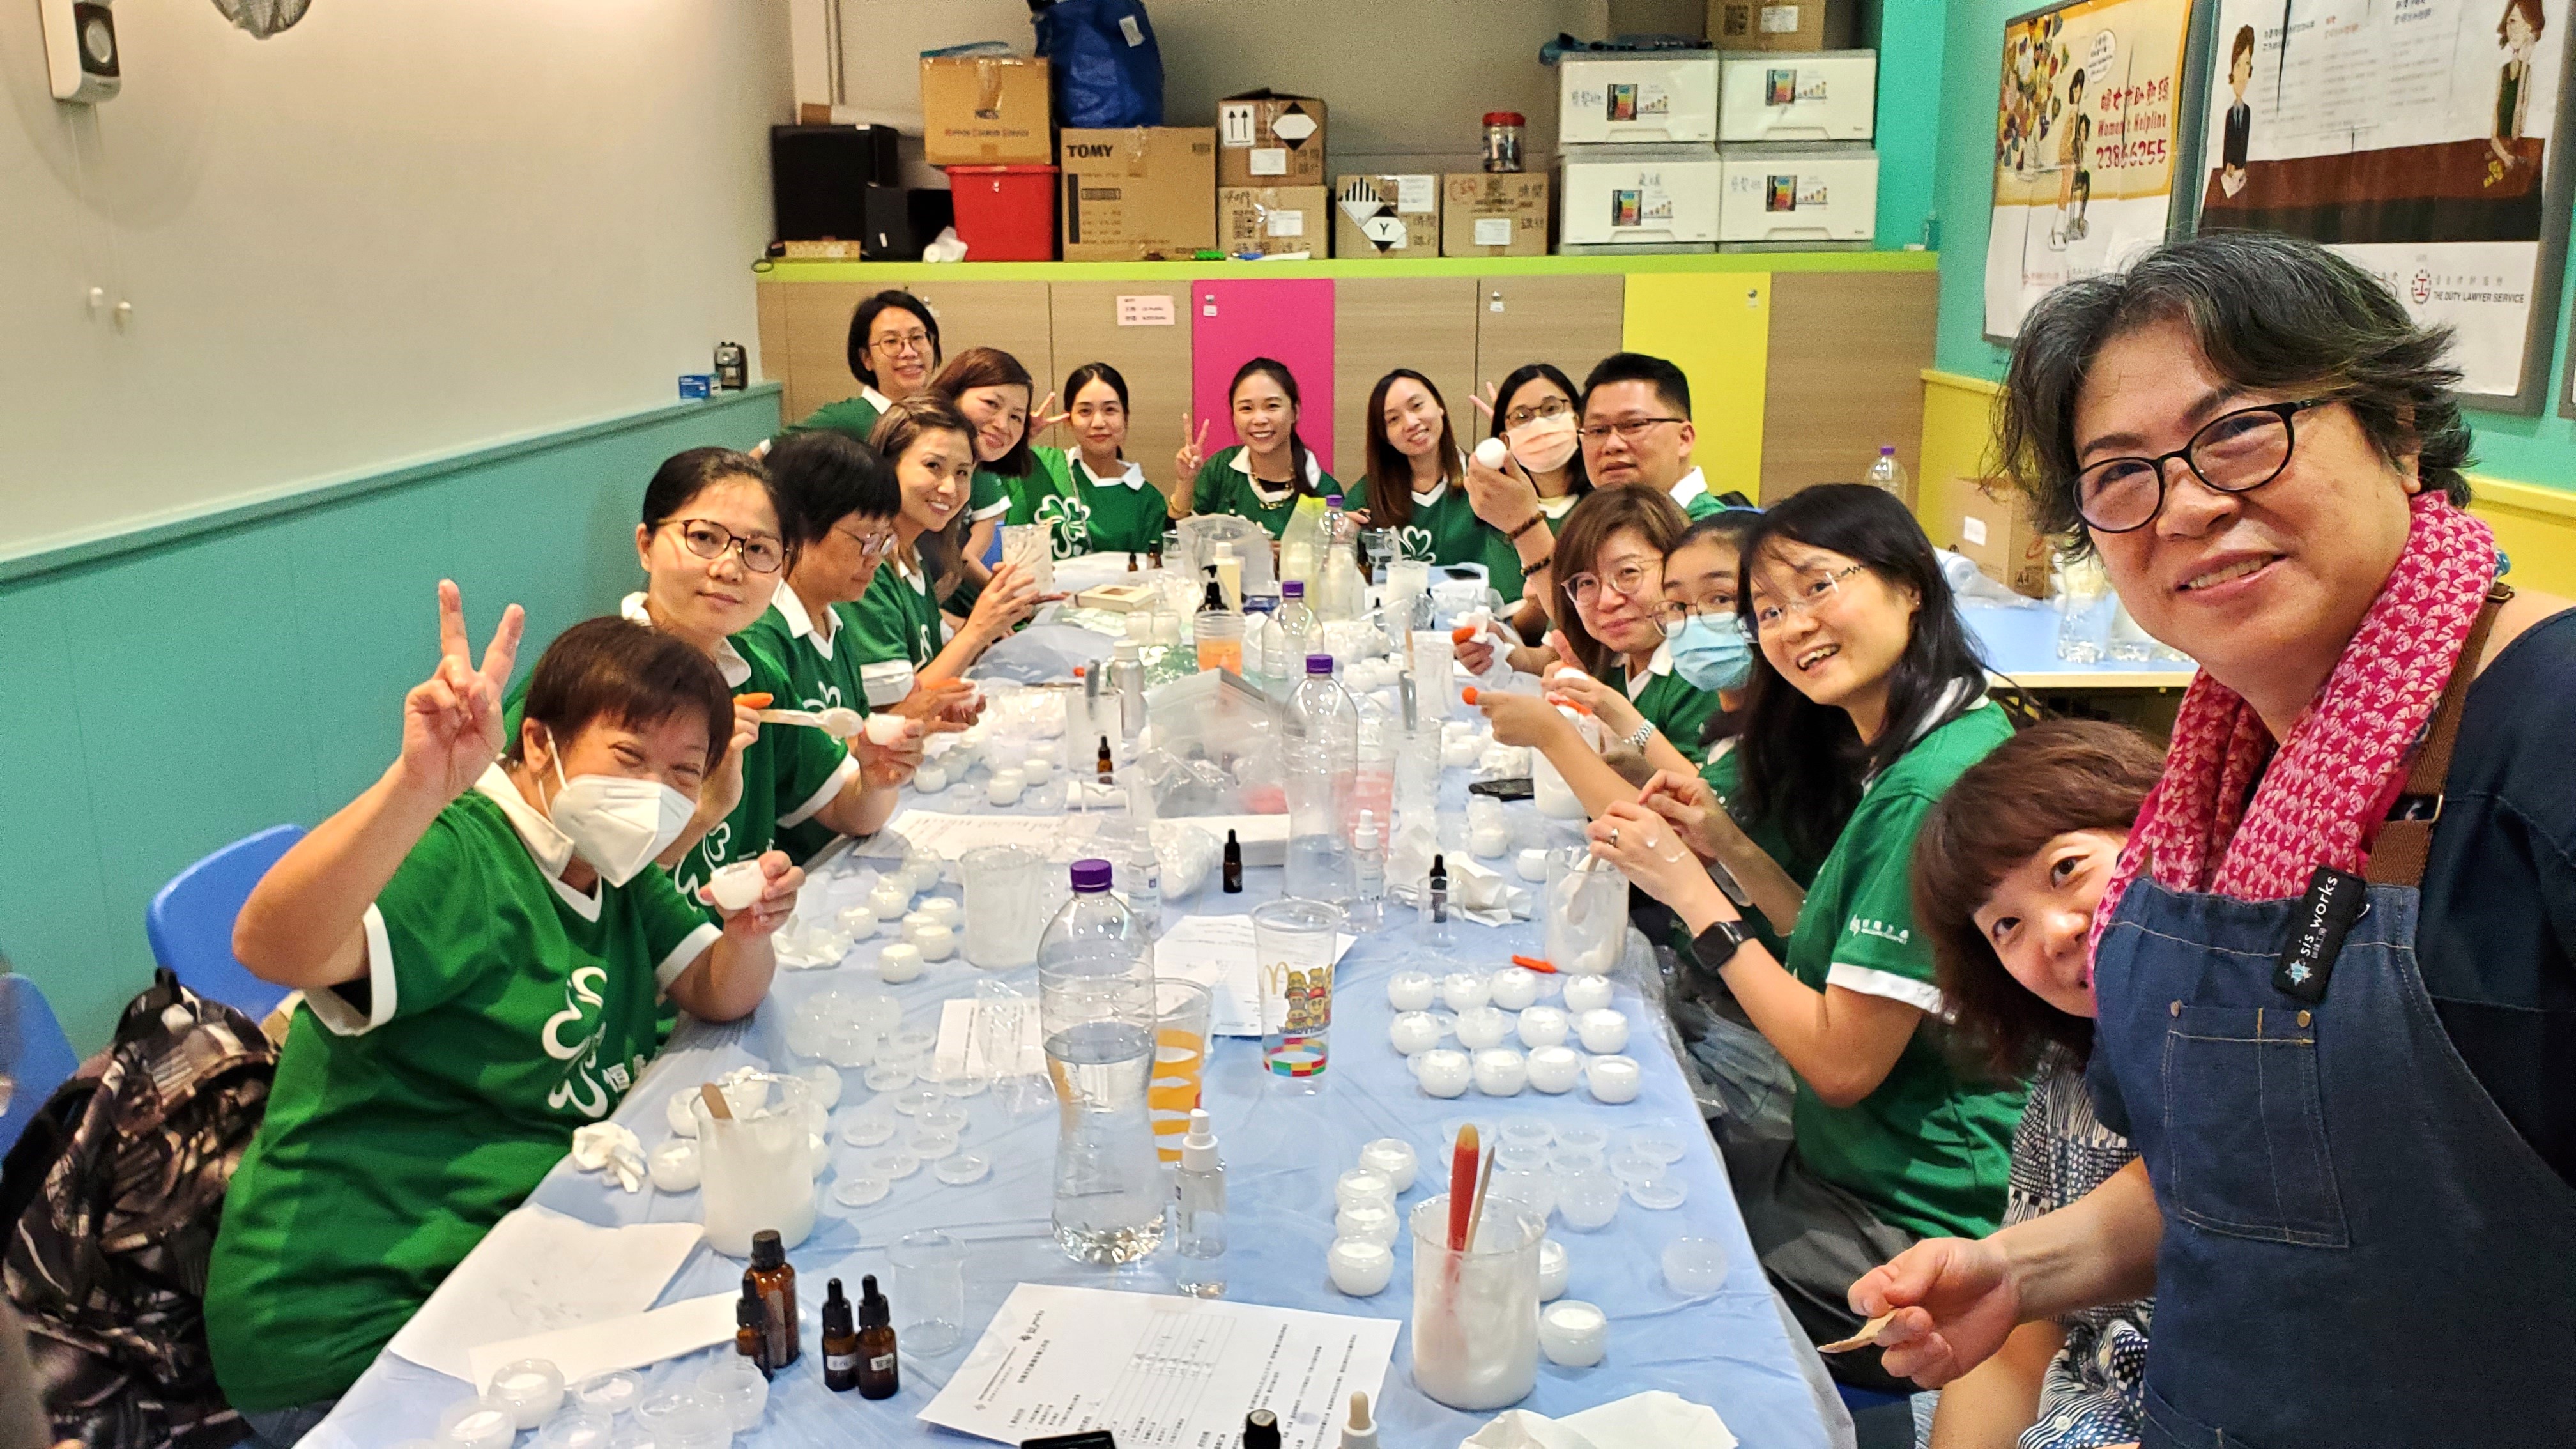 In Hong Kong, the Hang Lung As One Volunteer Team made hand creams and gifted the products to nearly 500 disadvantaged women, reminding them to take care of themselves and prioritize their physical and mental wellbeing